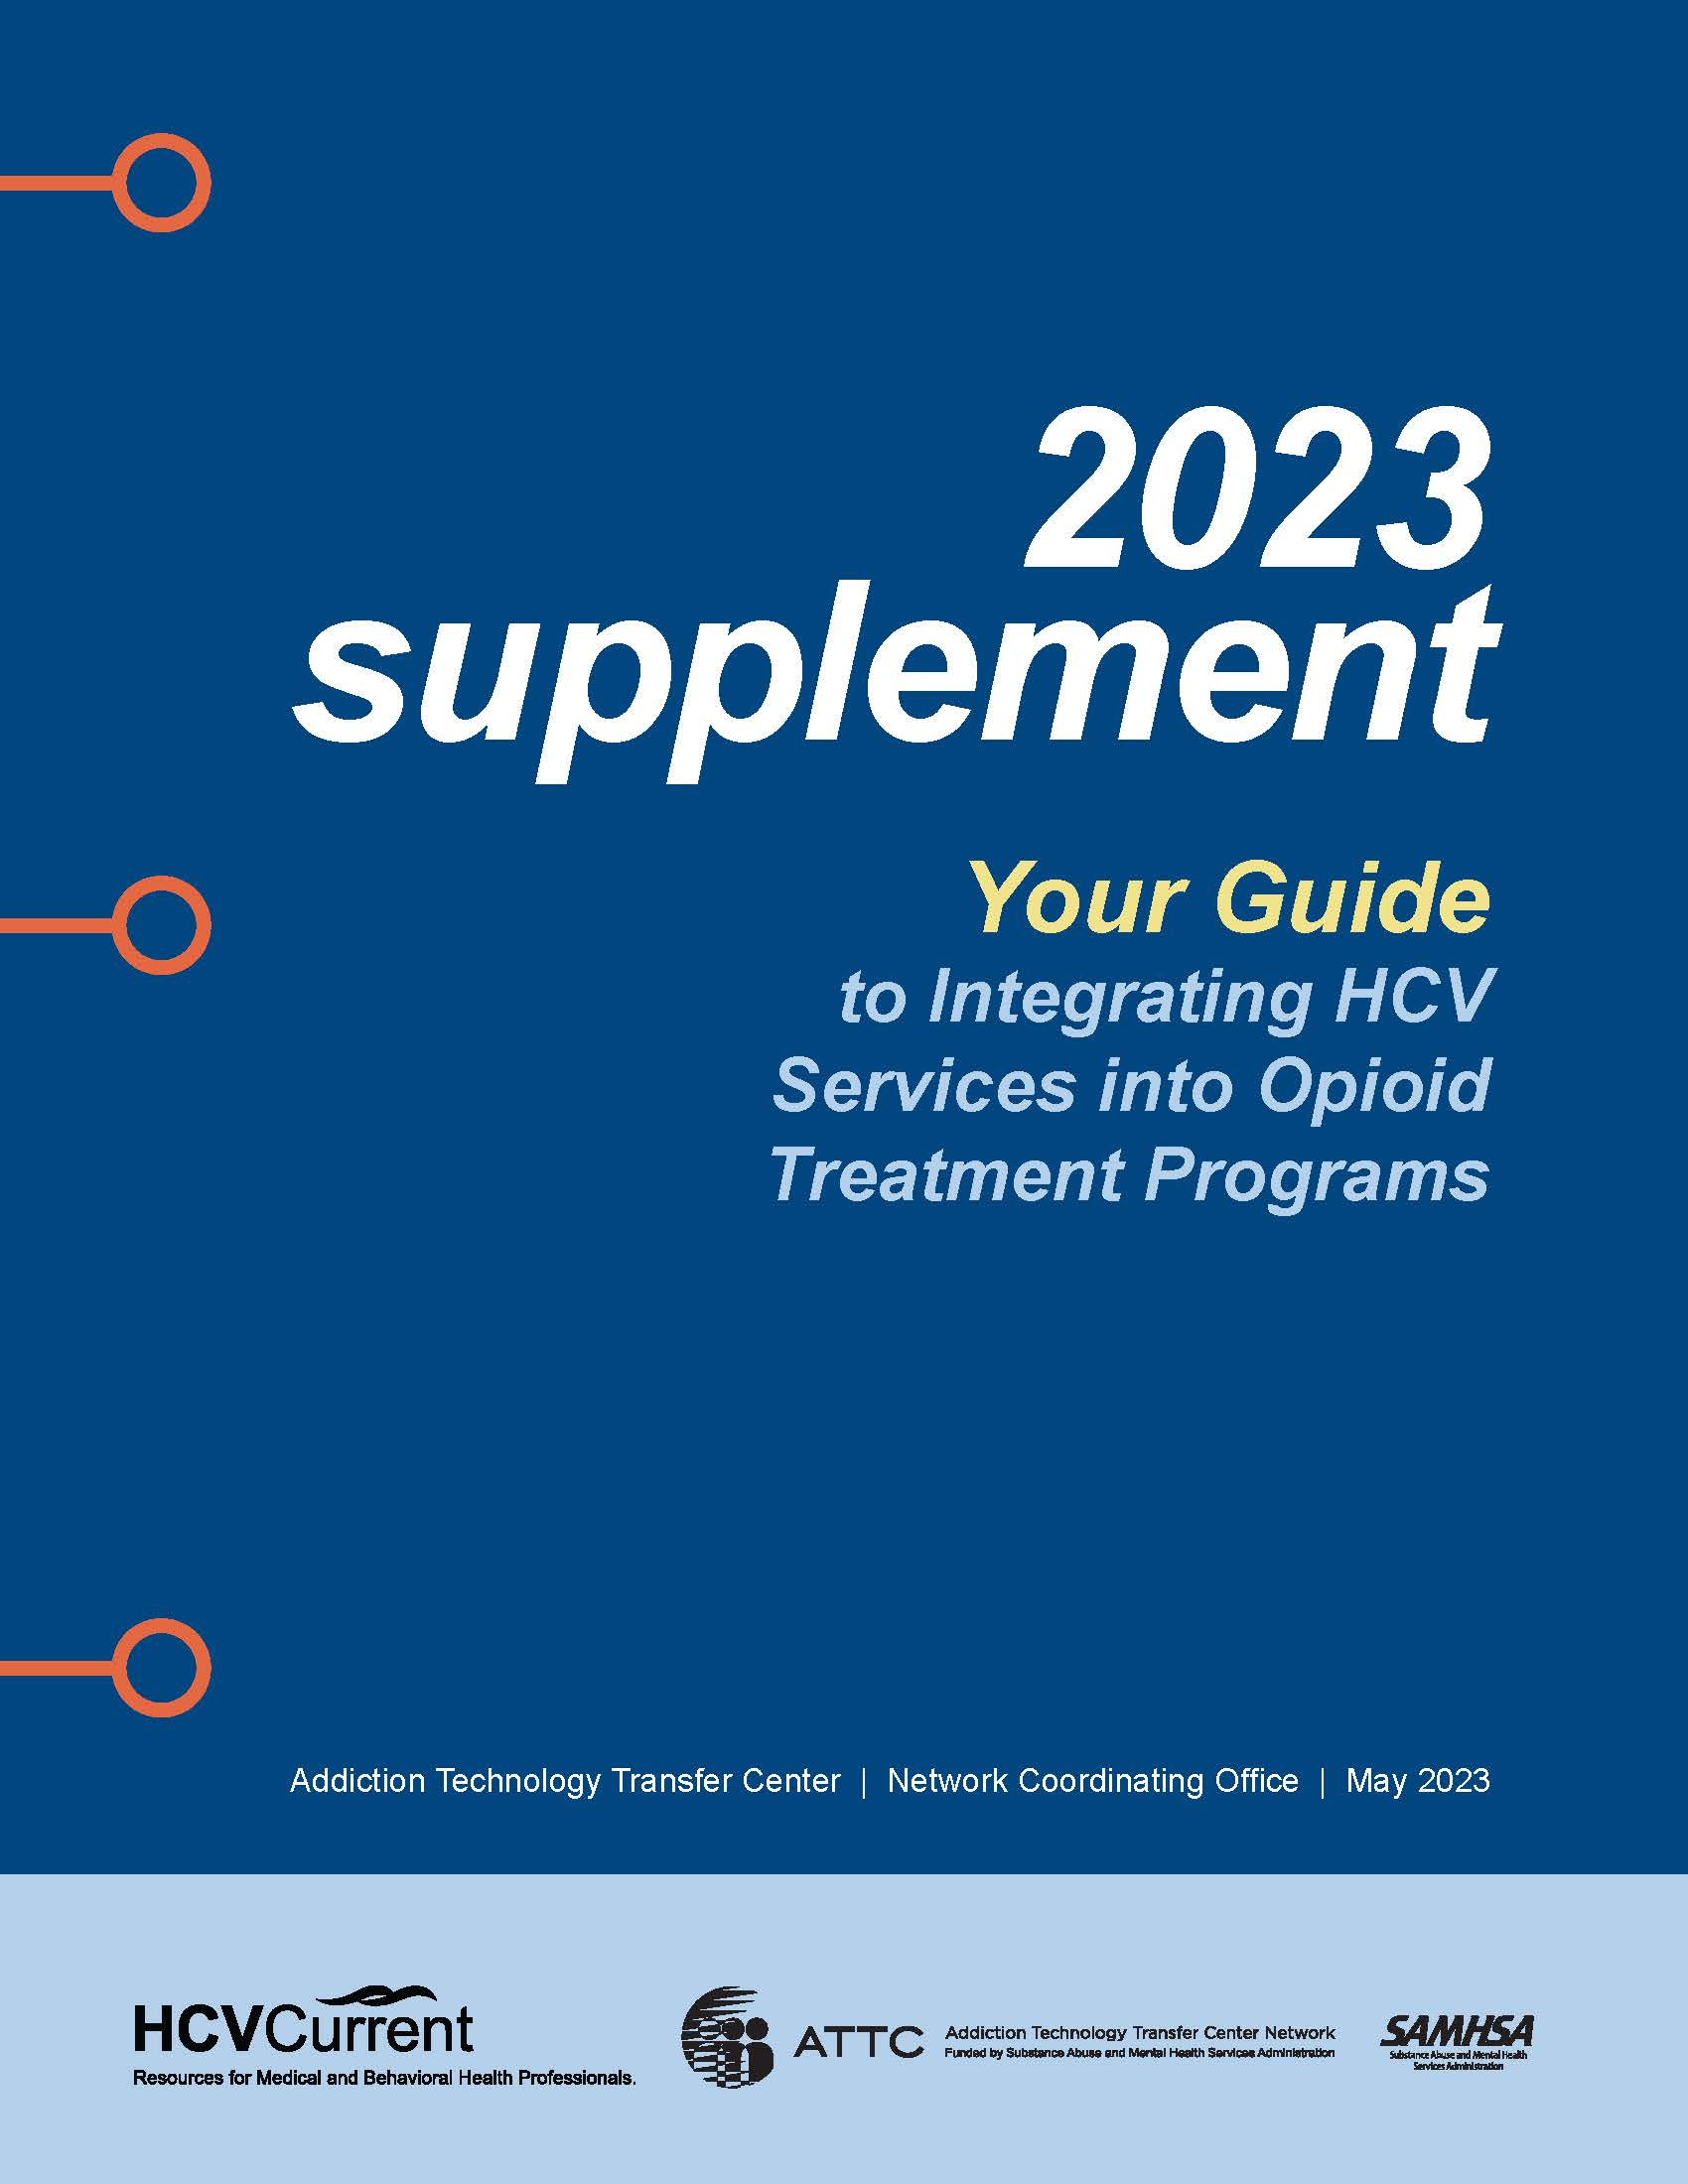 Supplemental Report to a Guide on HCV Services in Opioid Treatment Programs